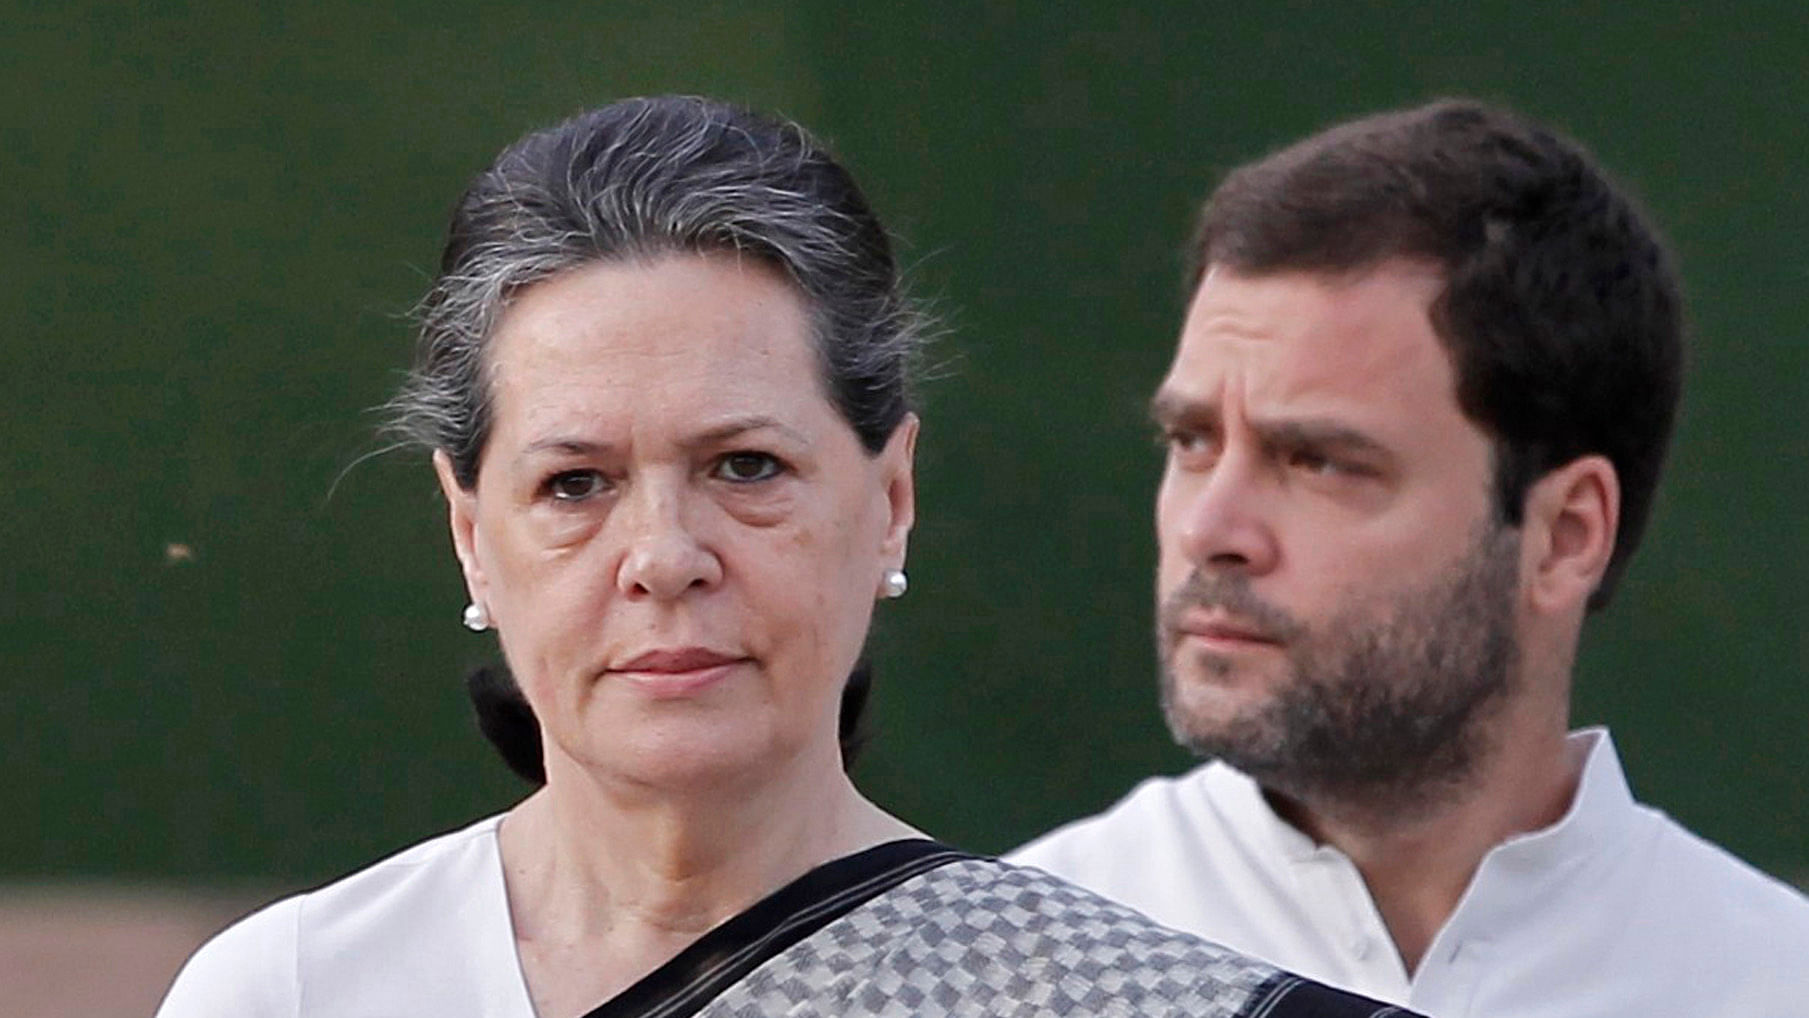 UPA Chairperson Sonia Gandhi with Congress President Rahul Gandhi in a file photo.